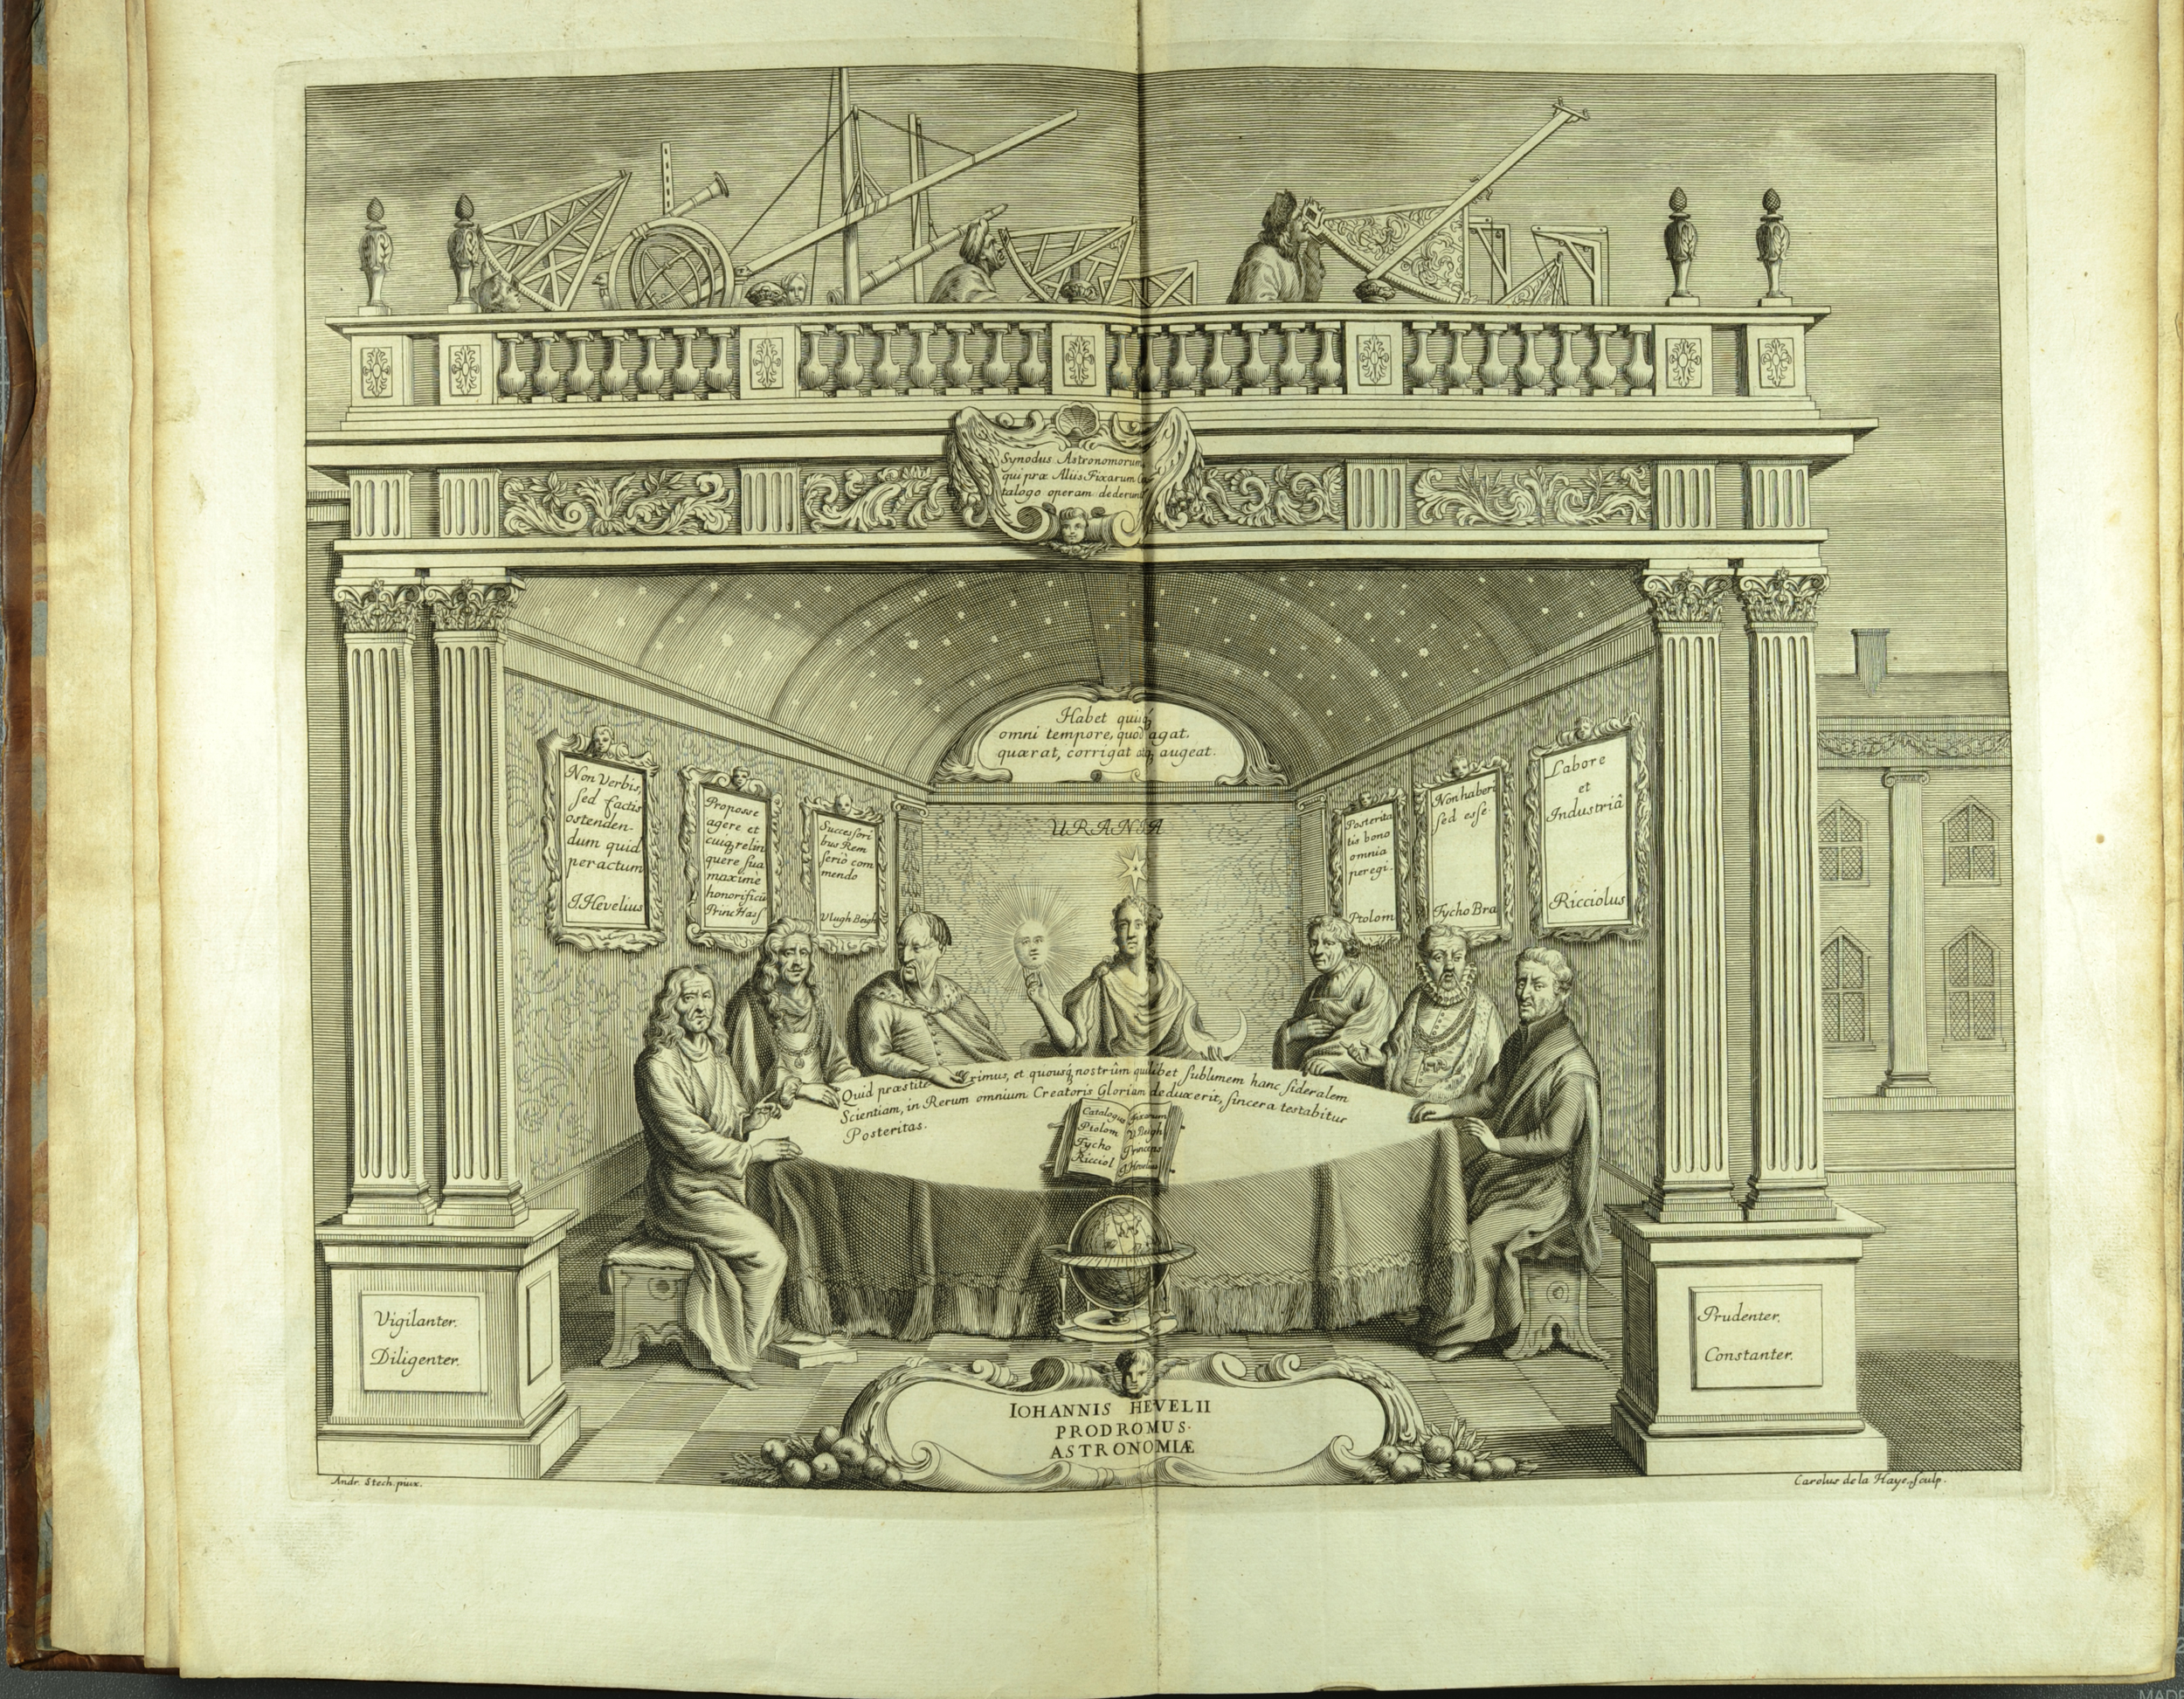 The added engraved title page of Prodromus astronomiae (1690) which places Hevelius at the same heavenly table as Ptolomy, Tycho Brahe and Urania (St Andrews copy at r17f QB41.H2).